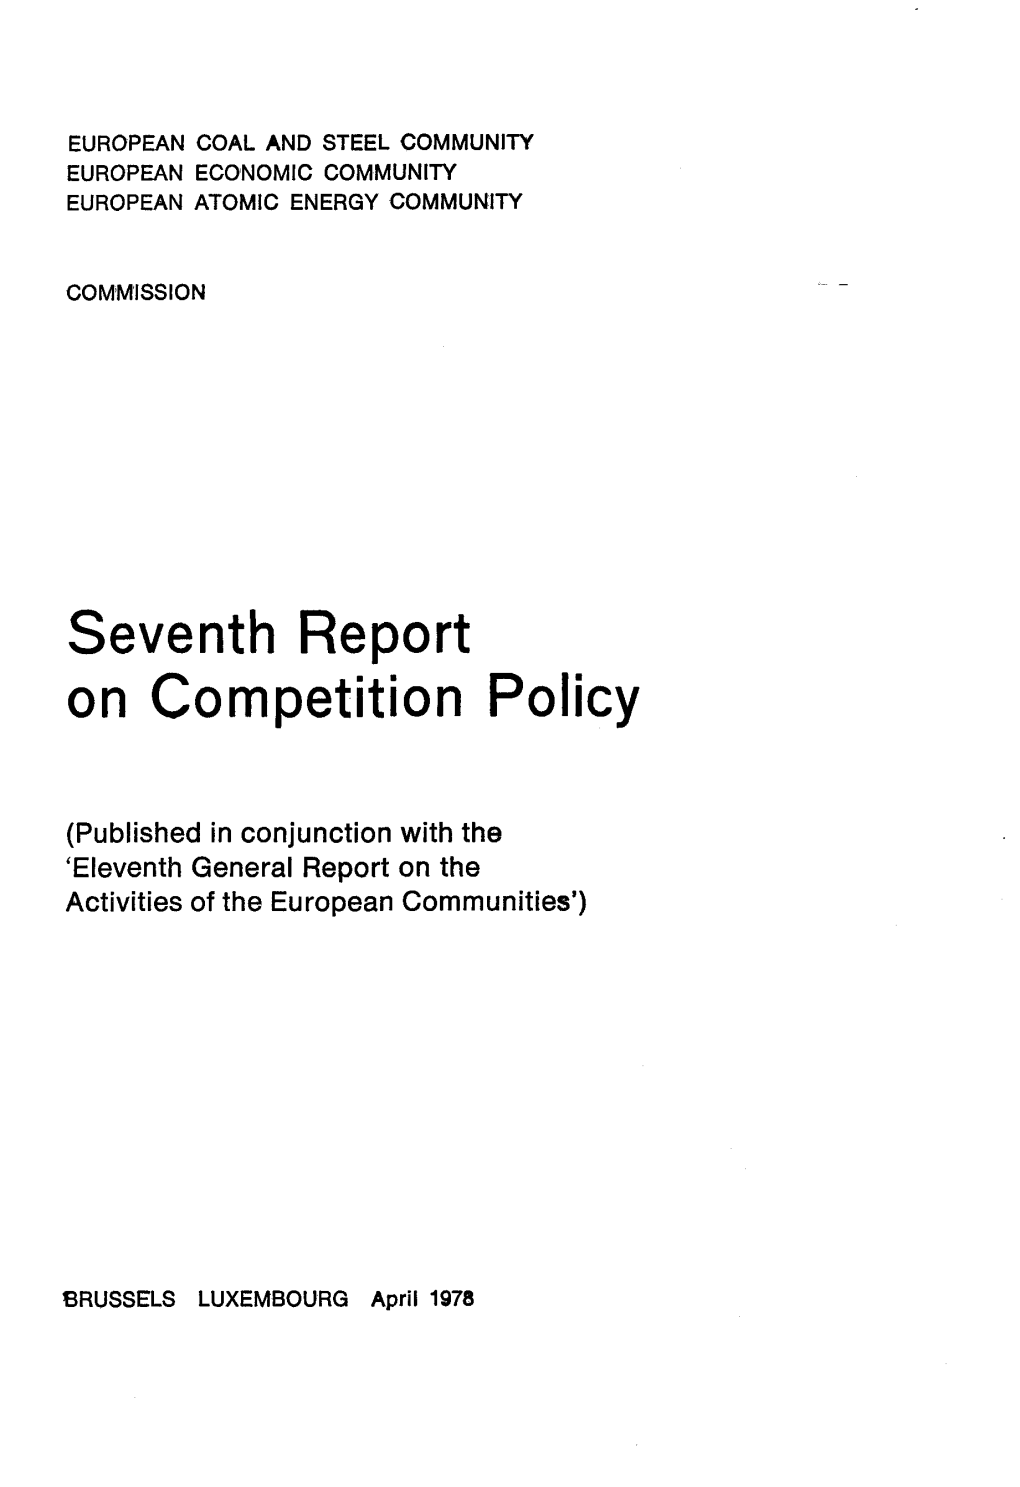 On Competition Policy